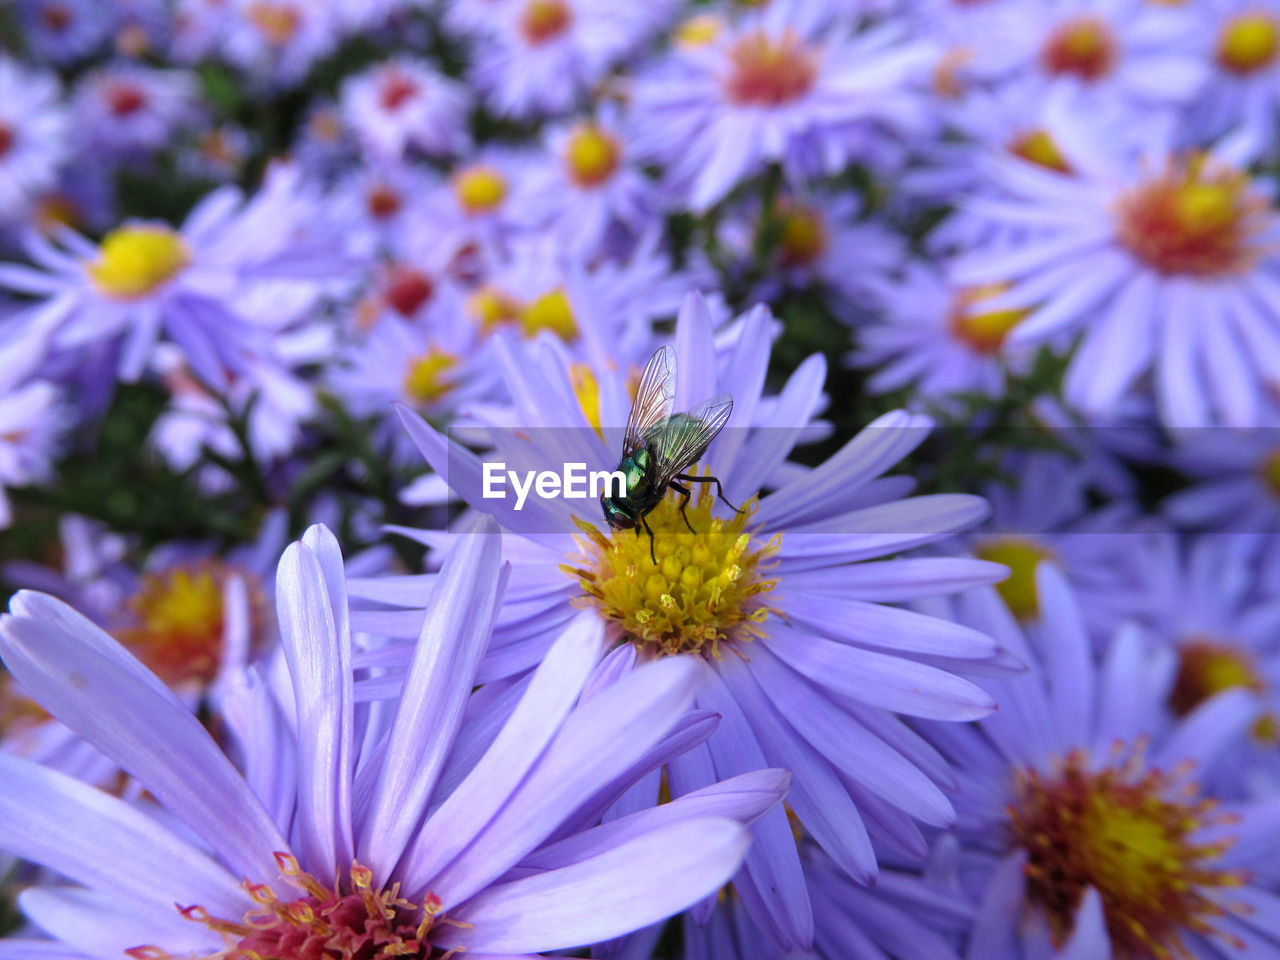 flower, flowering plant, plant, beauty in nature, freshness, fragility, animal themes, animal, insect, close-up, petal, animal wildlife, growth, flower head, wildlife, purple, nature, one animal, aster, no people, pollen, macro photography, inflorescence, bee, focus on foreground, pollination, blossom, springtime, outdoors, day, selective focus, botany, daisy, wildflower, macro